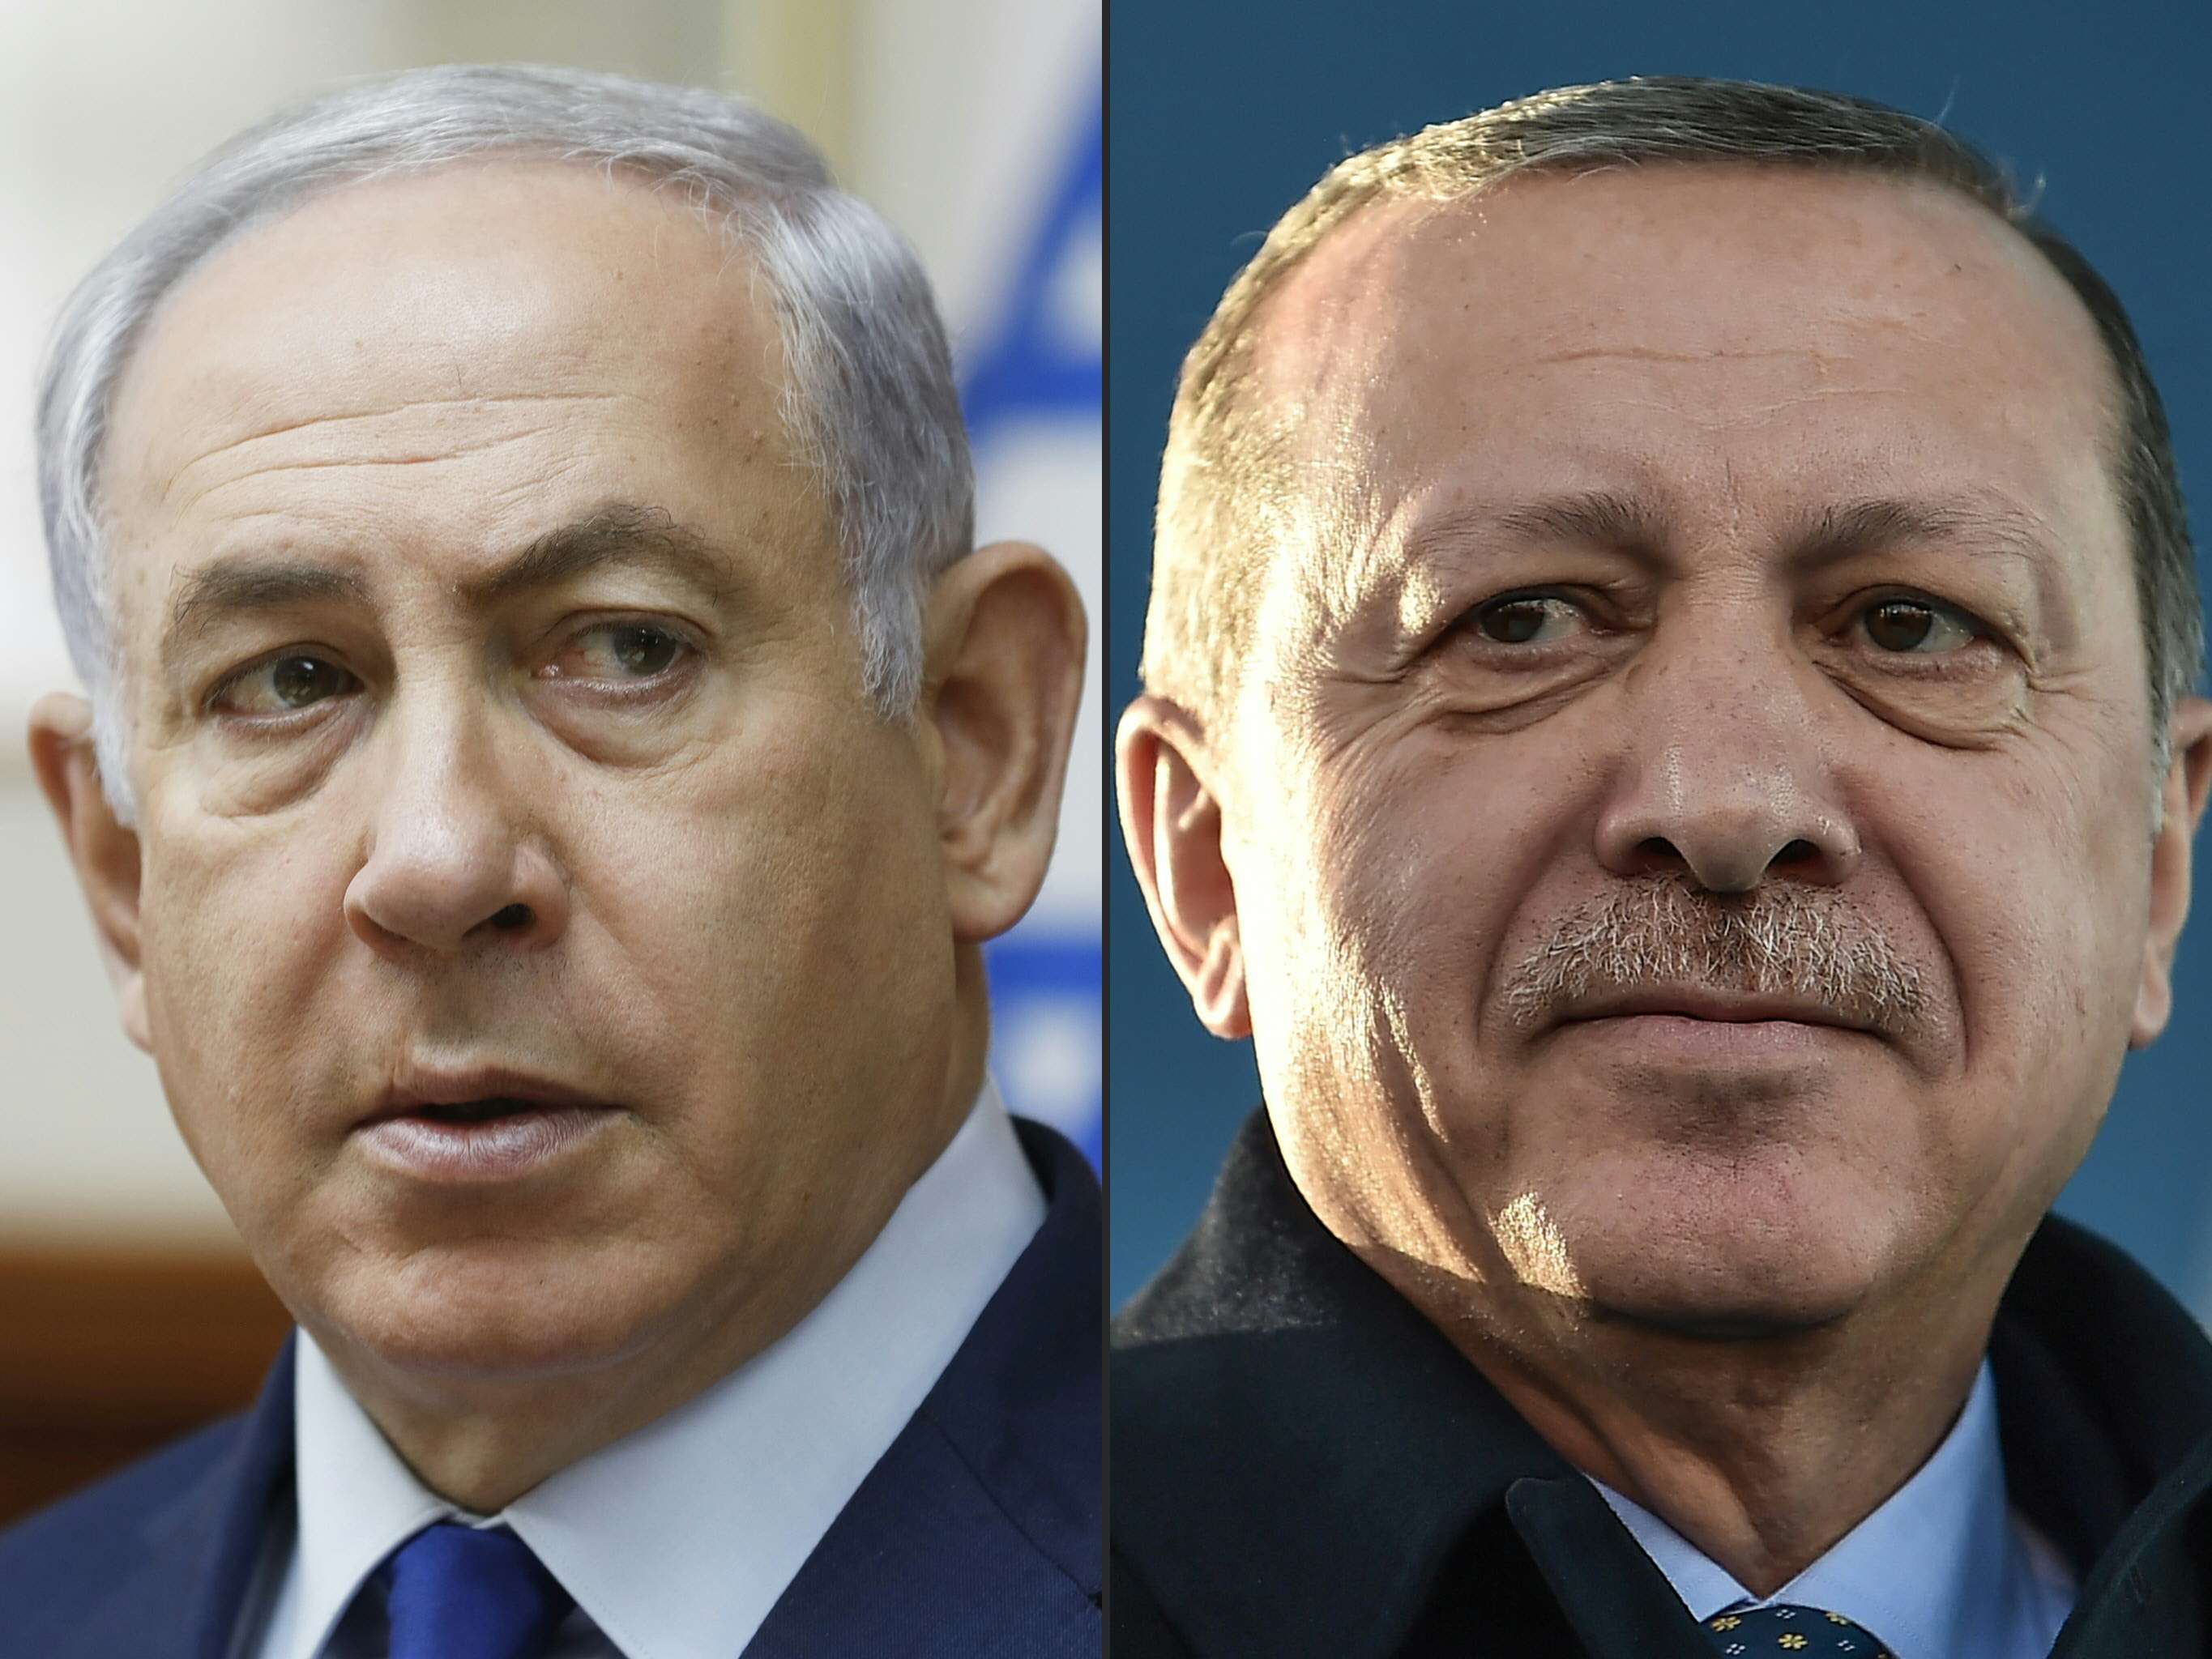  This combination of pictures created on April 1, 2018 shows a file photo taken on November 19, 2017 of Israel's Prime Minister Benjamin Netanyahu (L) attending the weekly cabinet meeting in Jerusalem and a file photo taken on December 15, 2017 of Turkish President Recep Tayyip Erdogan during the inauguration ceremony of Turkey's first automated urban metro line on the Asian side of Istanbul.